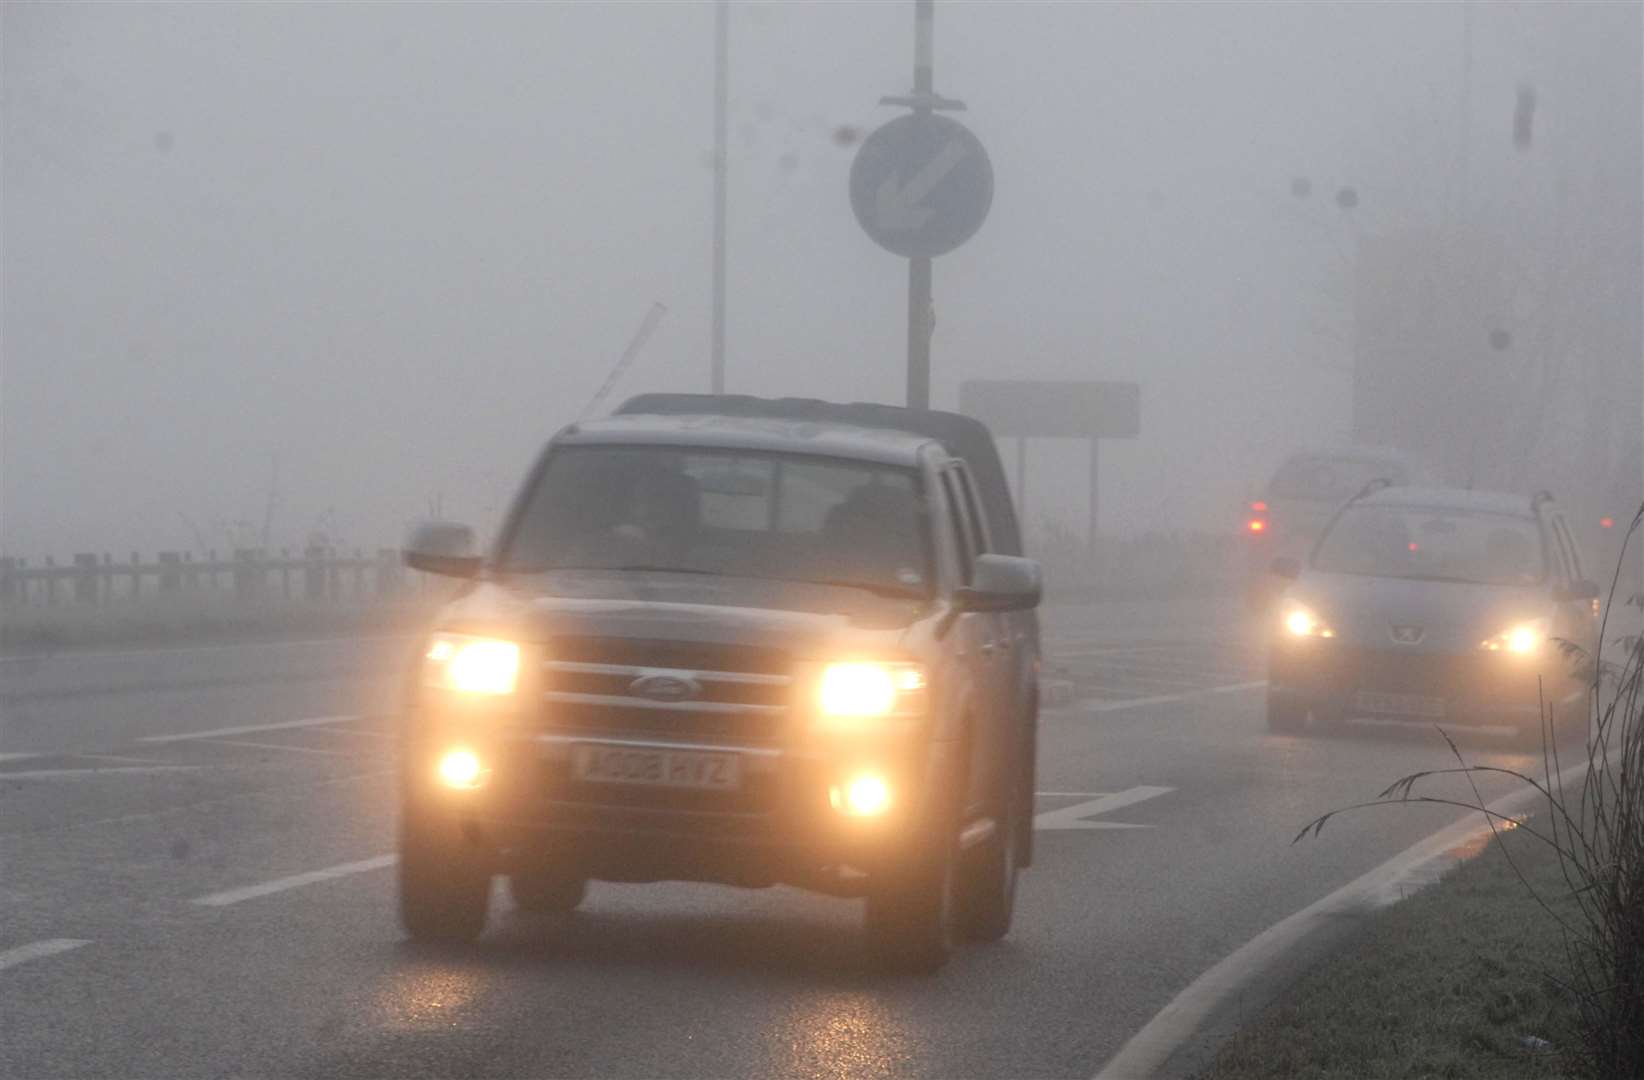 A warning has been issued for fog across Kent tomorrow